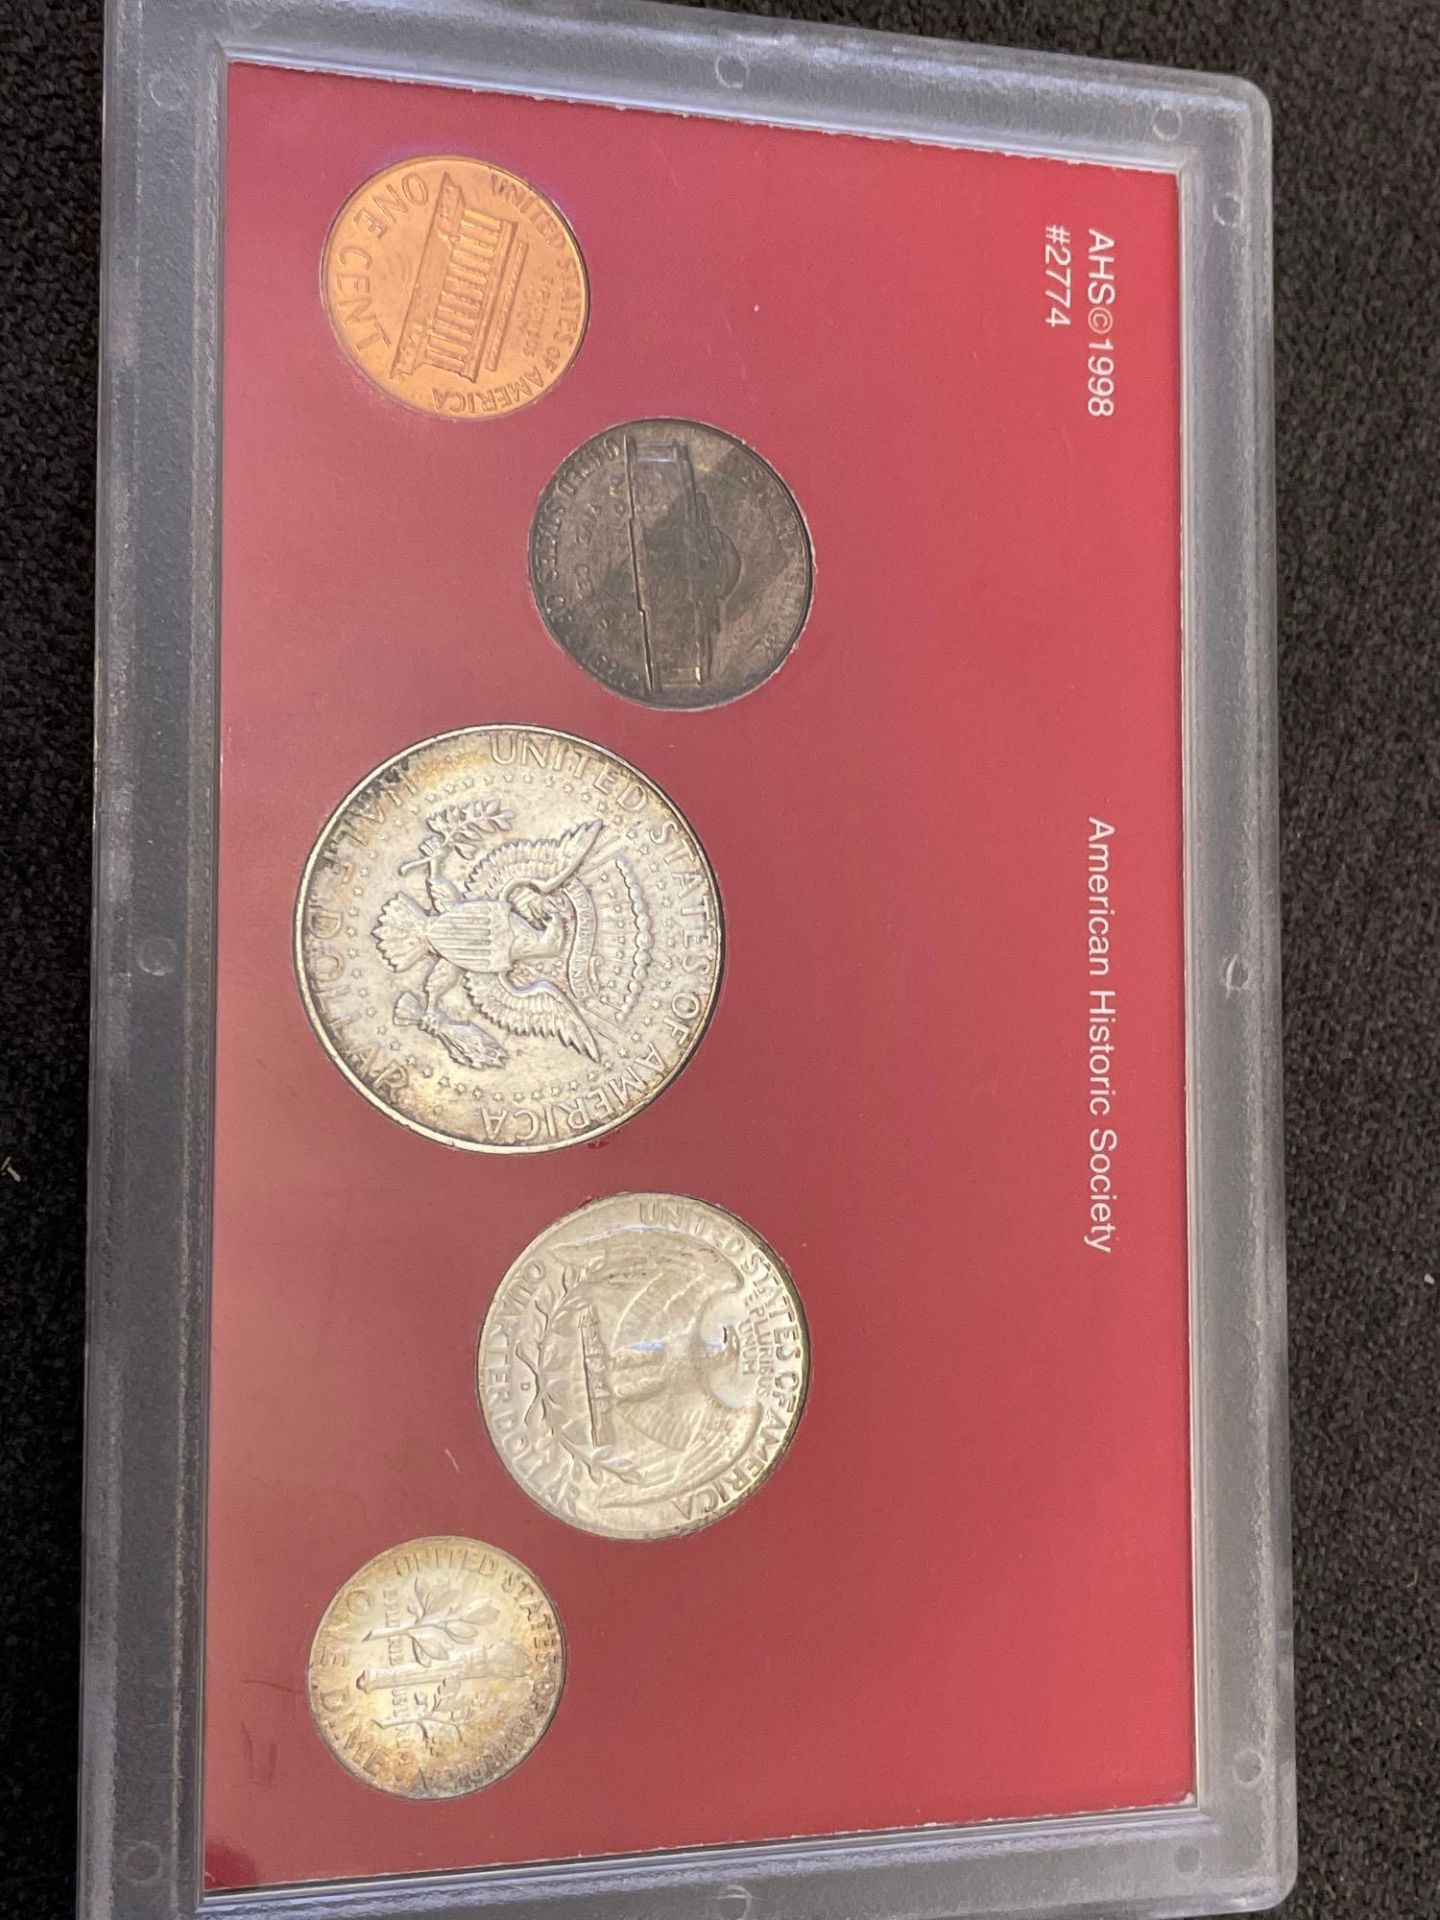 1964 Americana Series The Presidents Collection & Bicentennial Coinage 200 Years of Liberty 1776-197 - Image 3 of 5